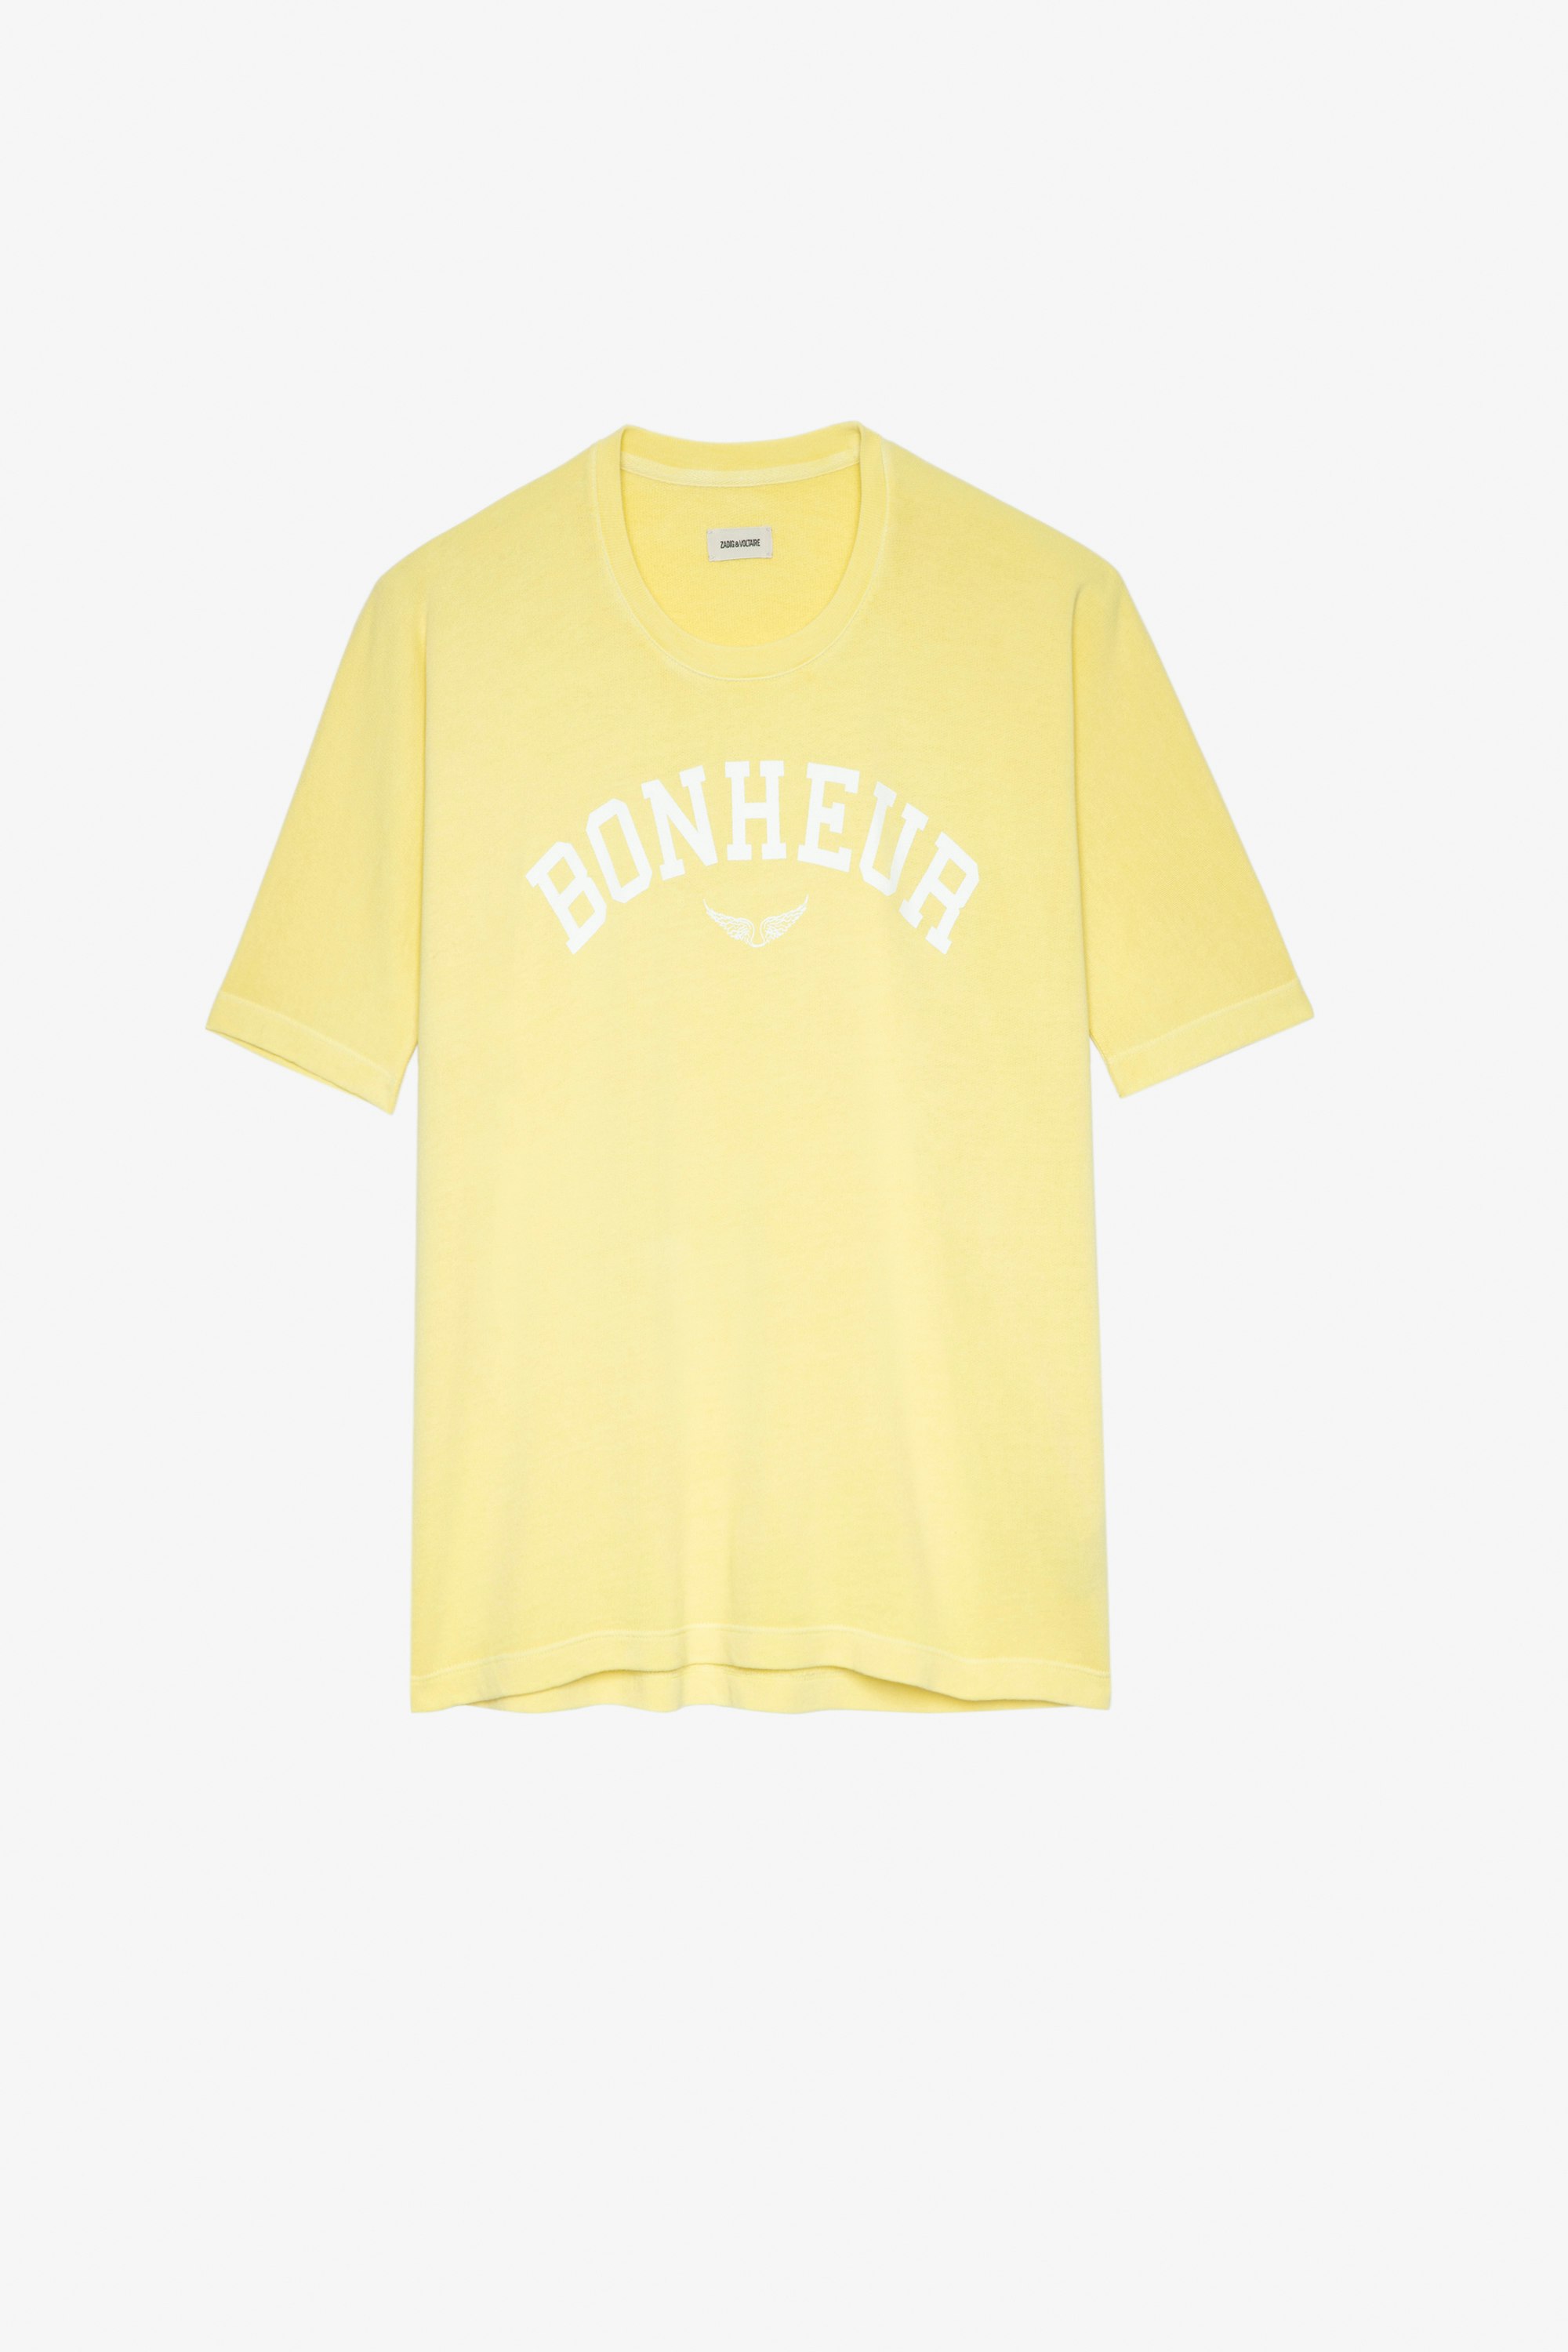 Portland Top Women's short-sleeved yellow top with wings and "Bonheur" slogan